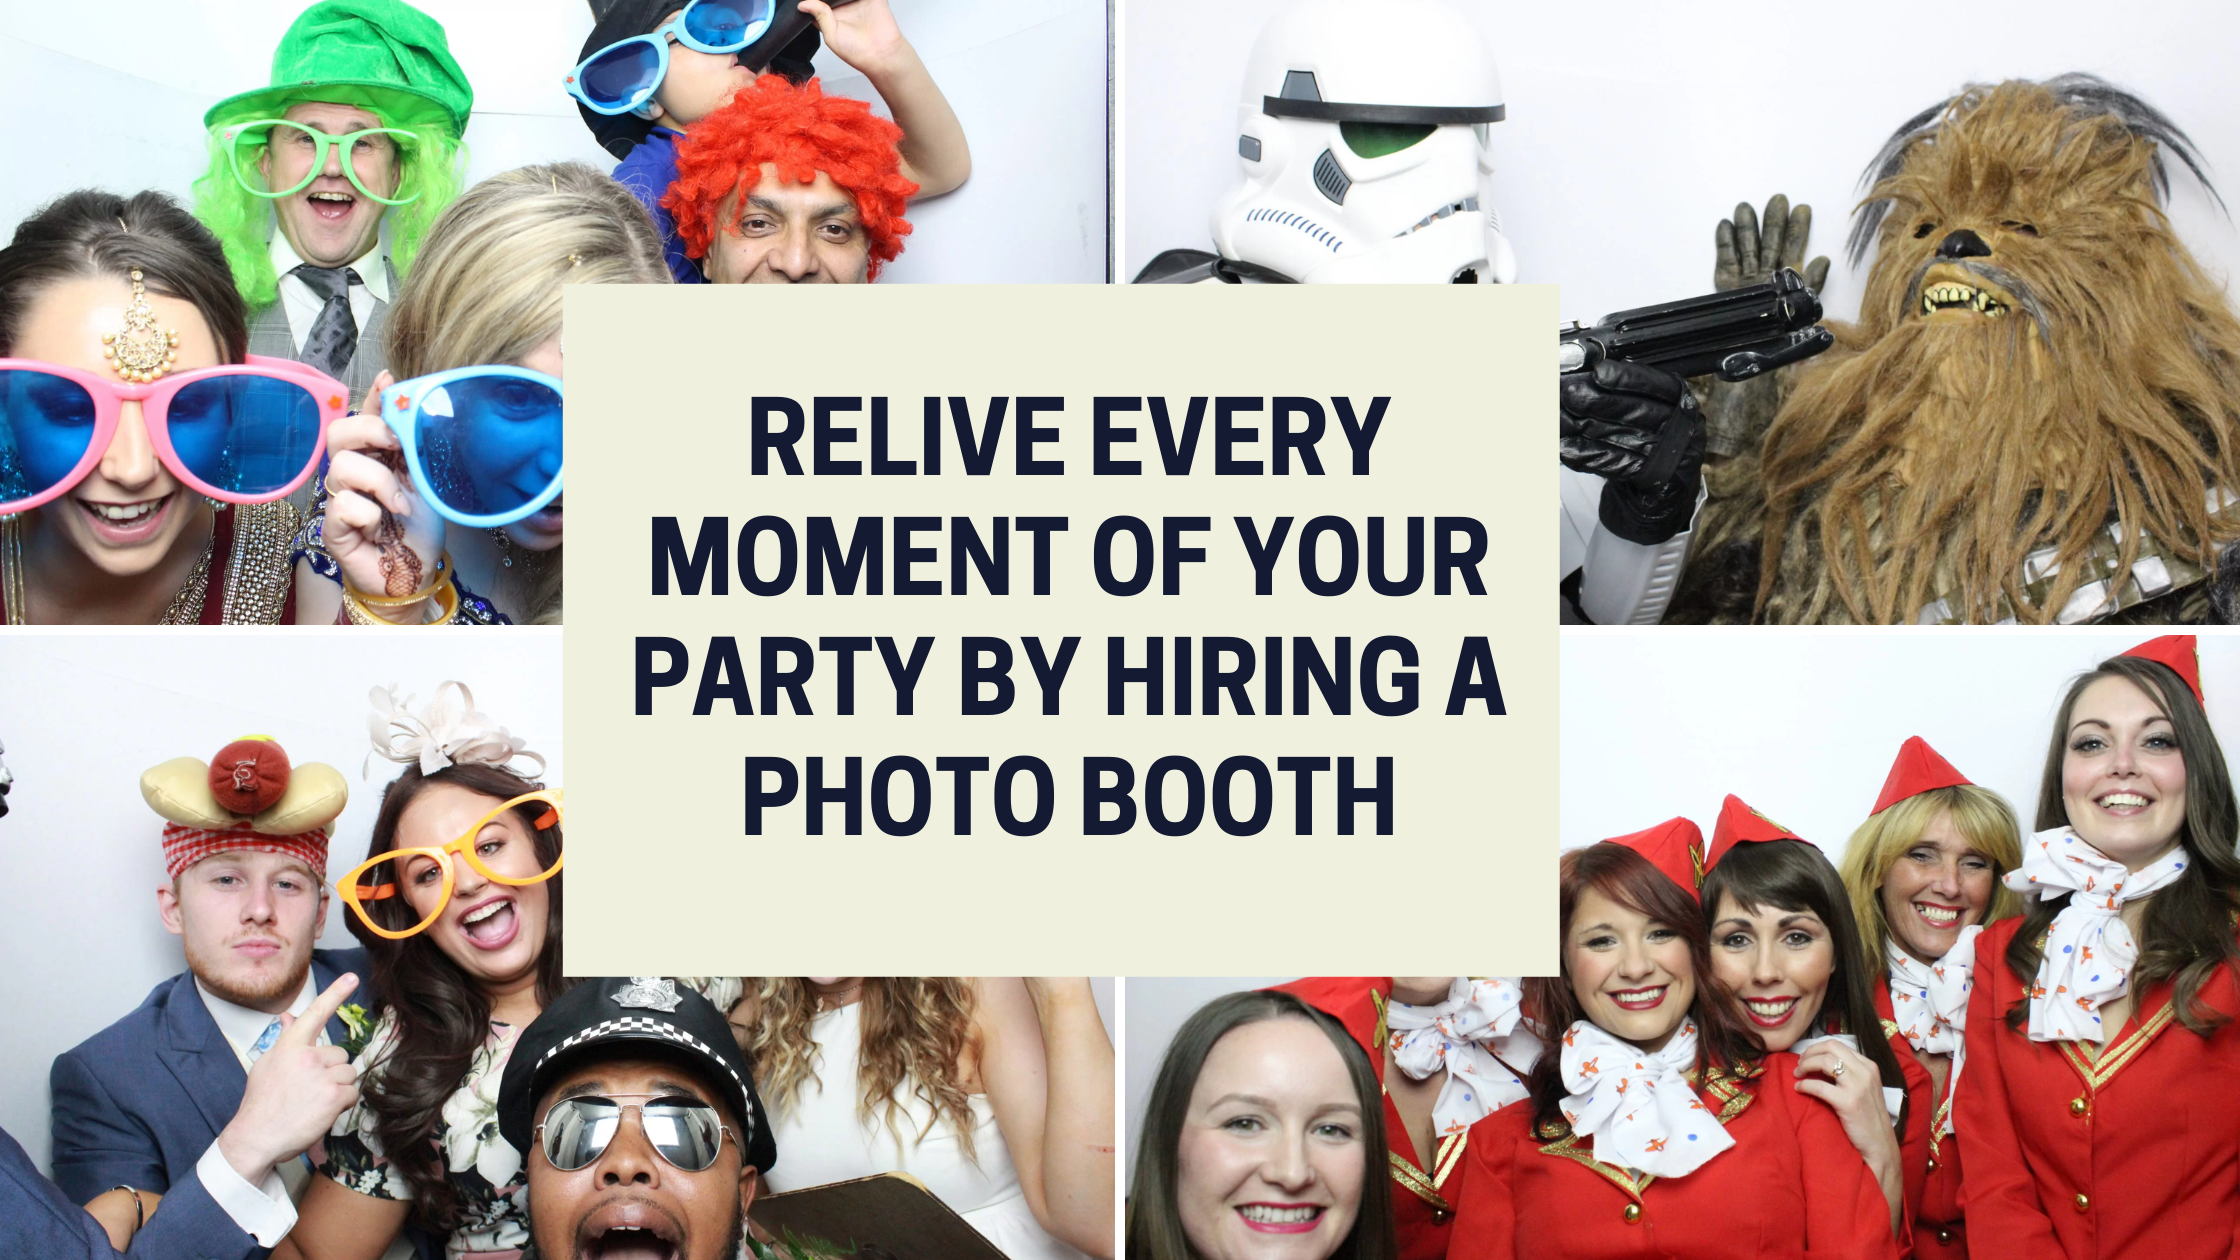 public/uploads/2022/01/Relive-Every-Moment-Of-Your-Party-By-Hiring-a-Photo-Booth.png